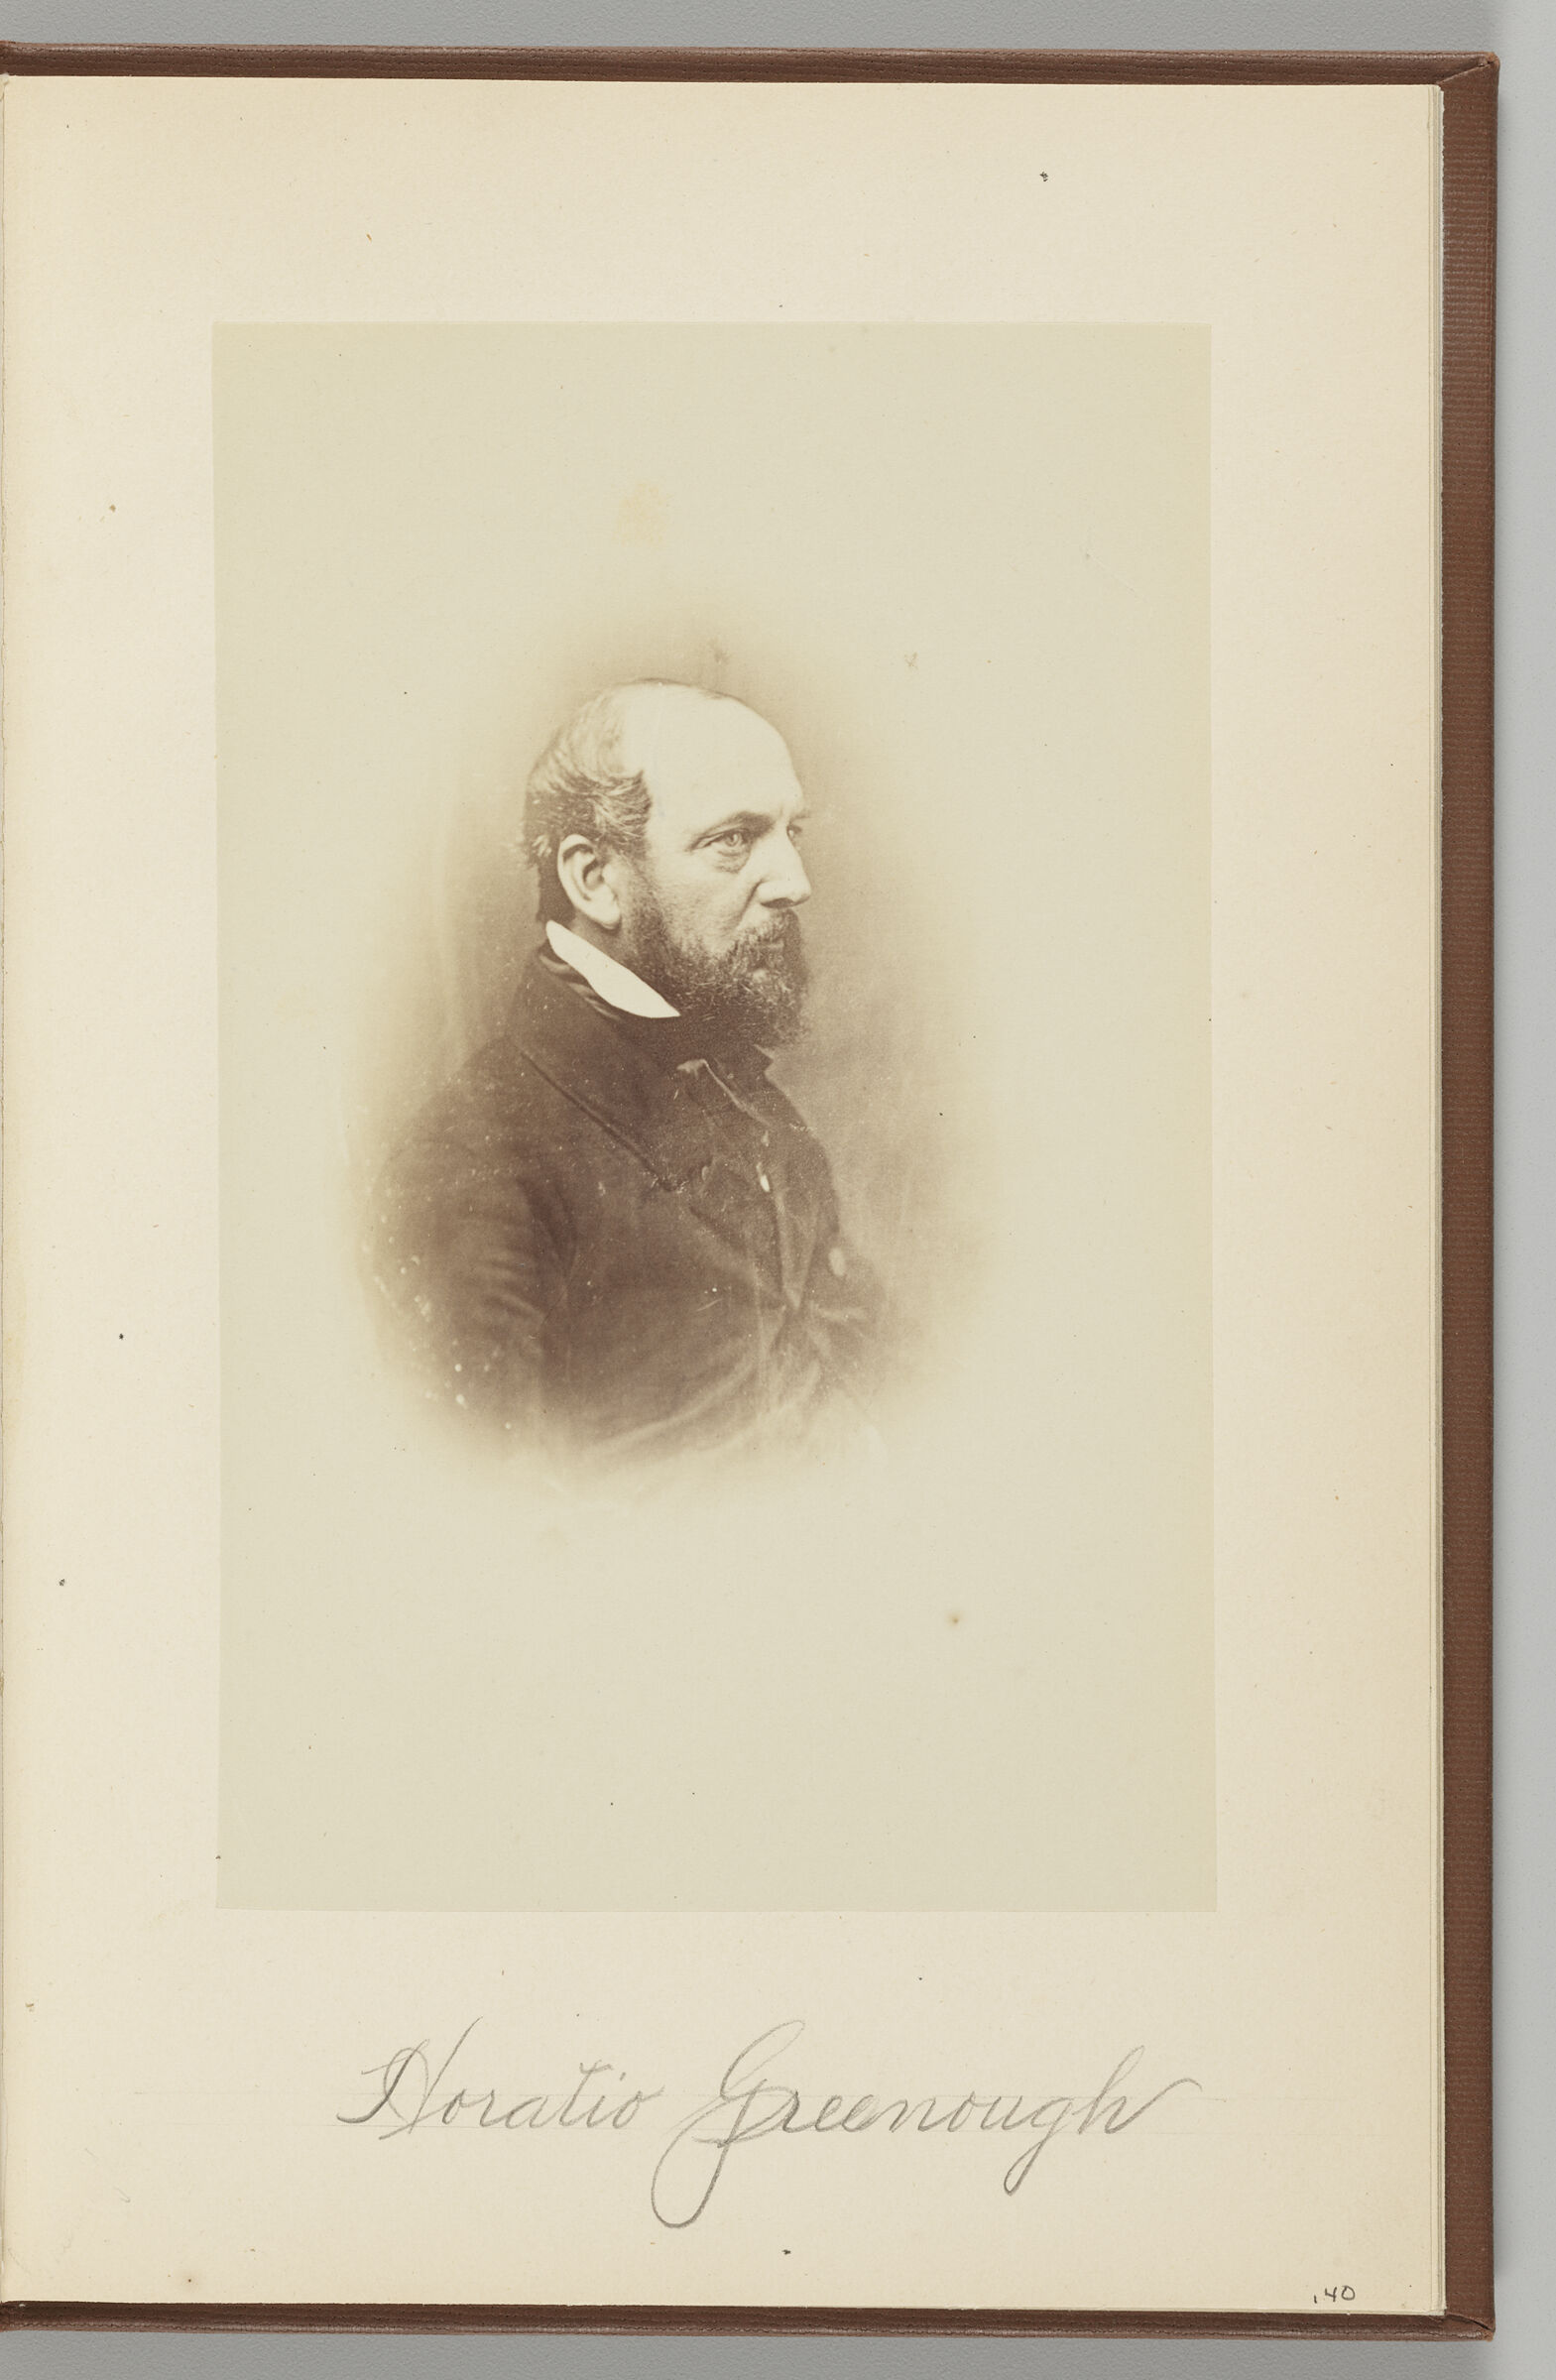 Horatio Greenough (1805-1852) [From A Daguerreotype]